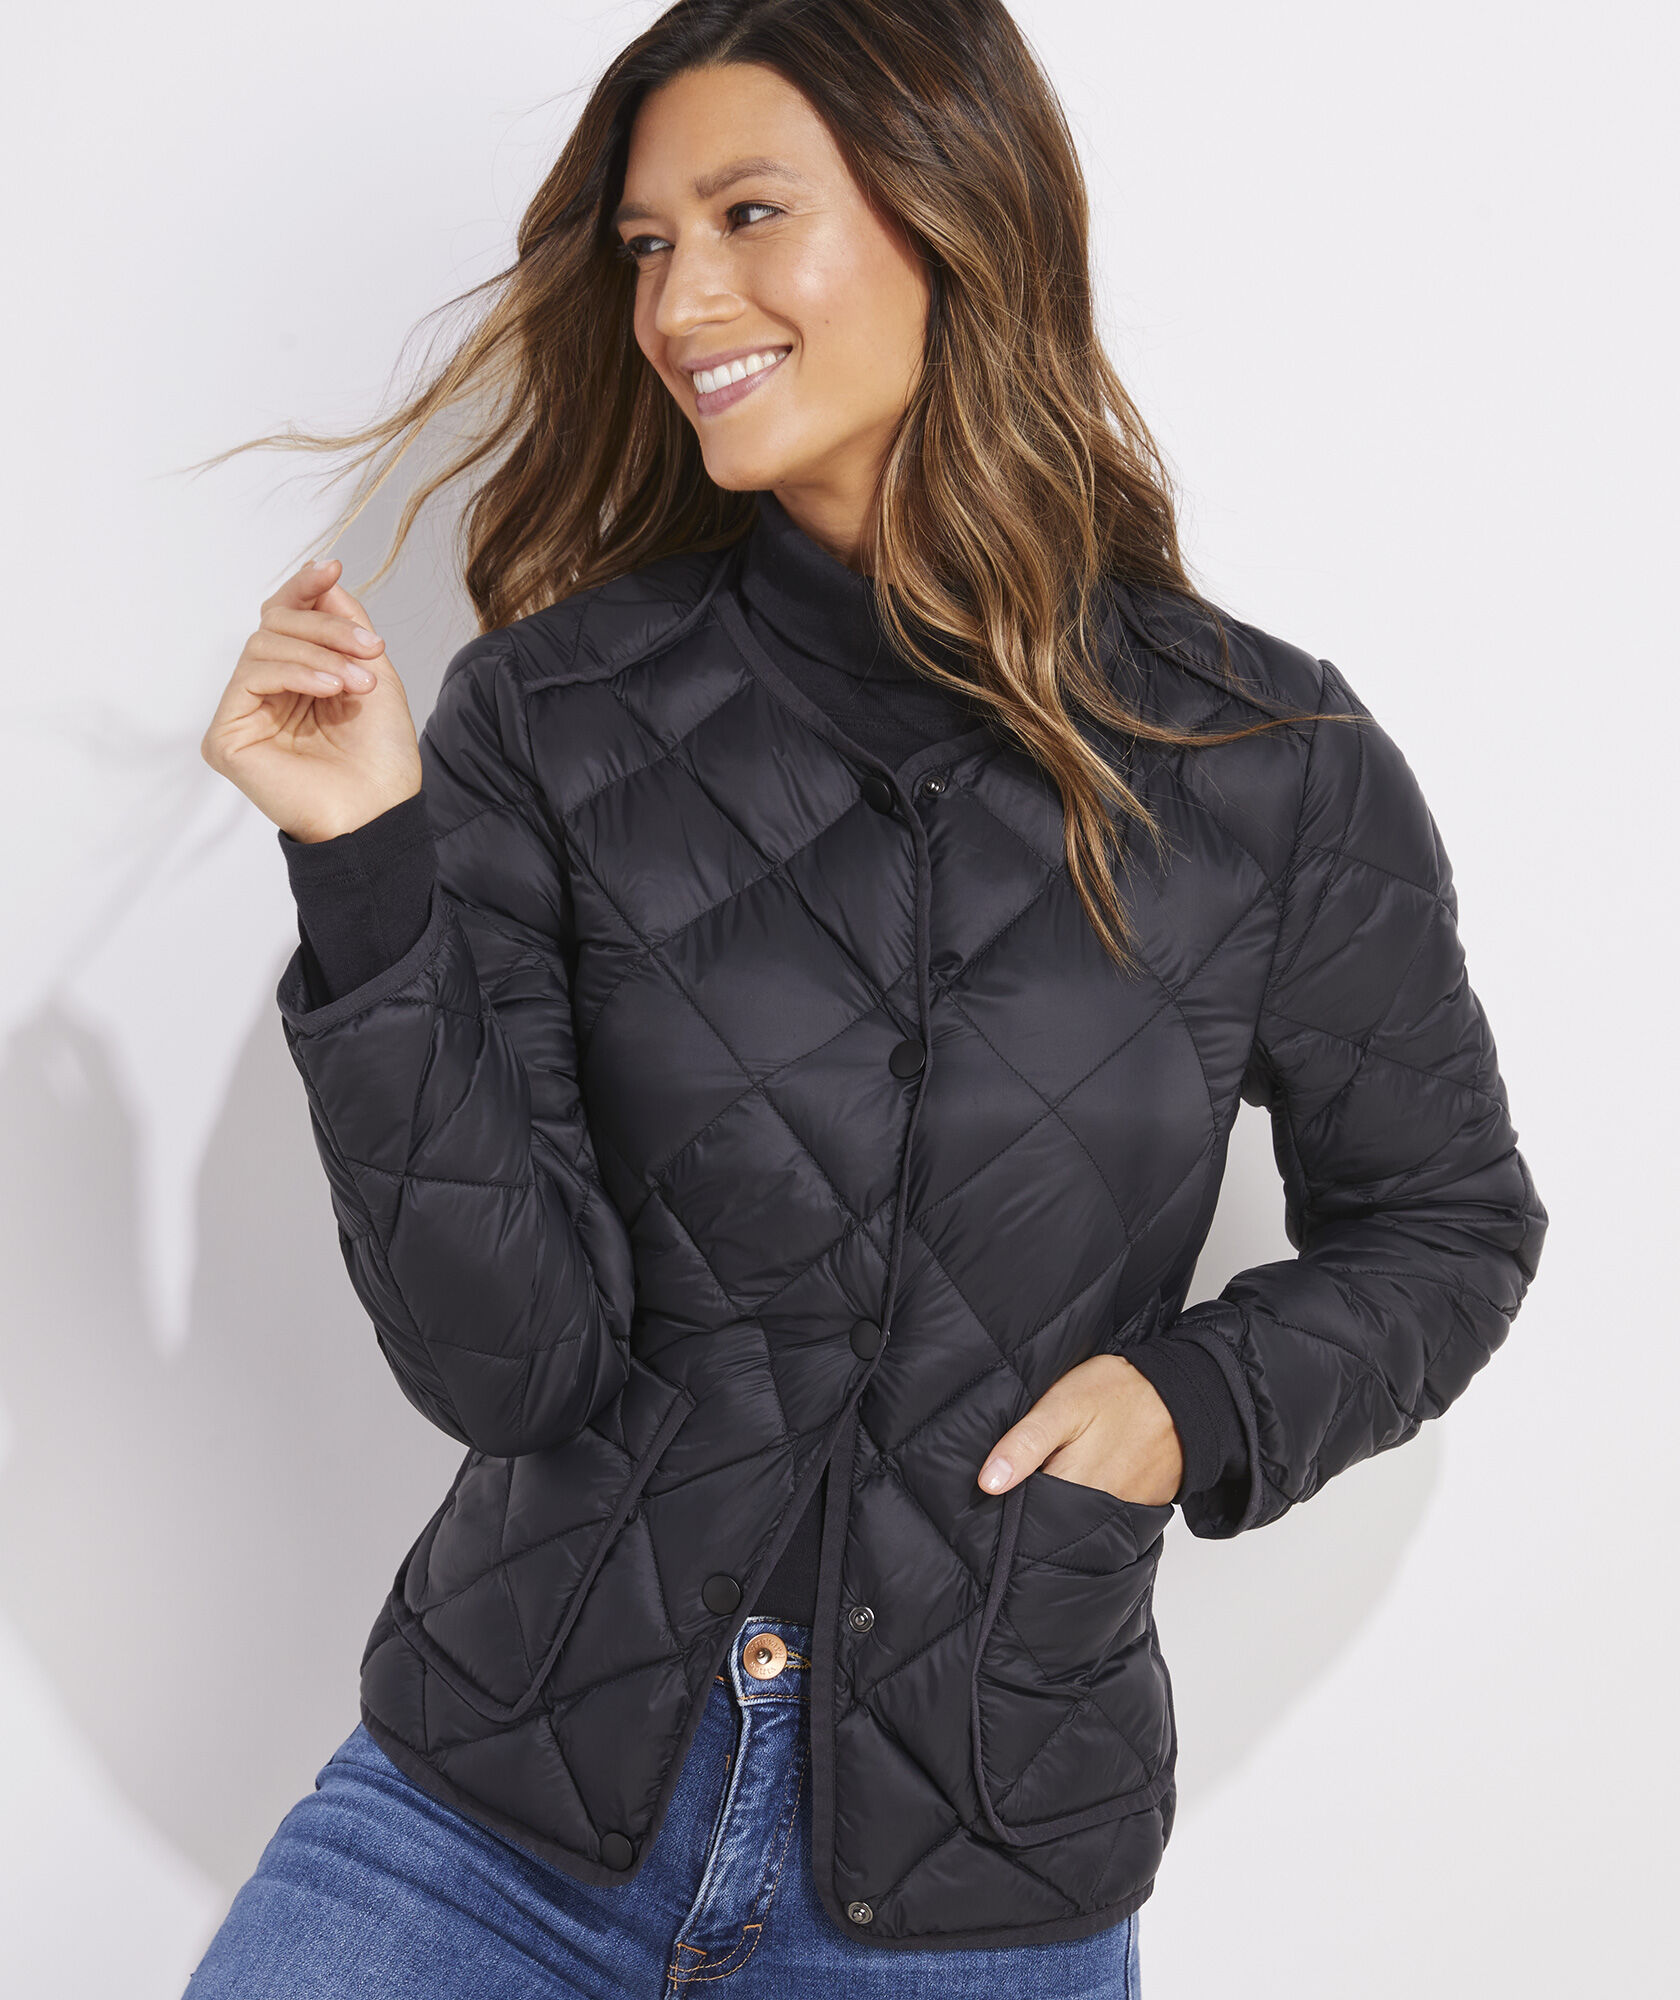 Womens Puffer Jacket With Faux Fur Hood Black And White – Styledup.co.uk